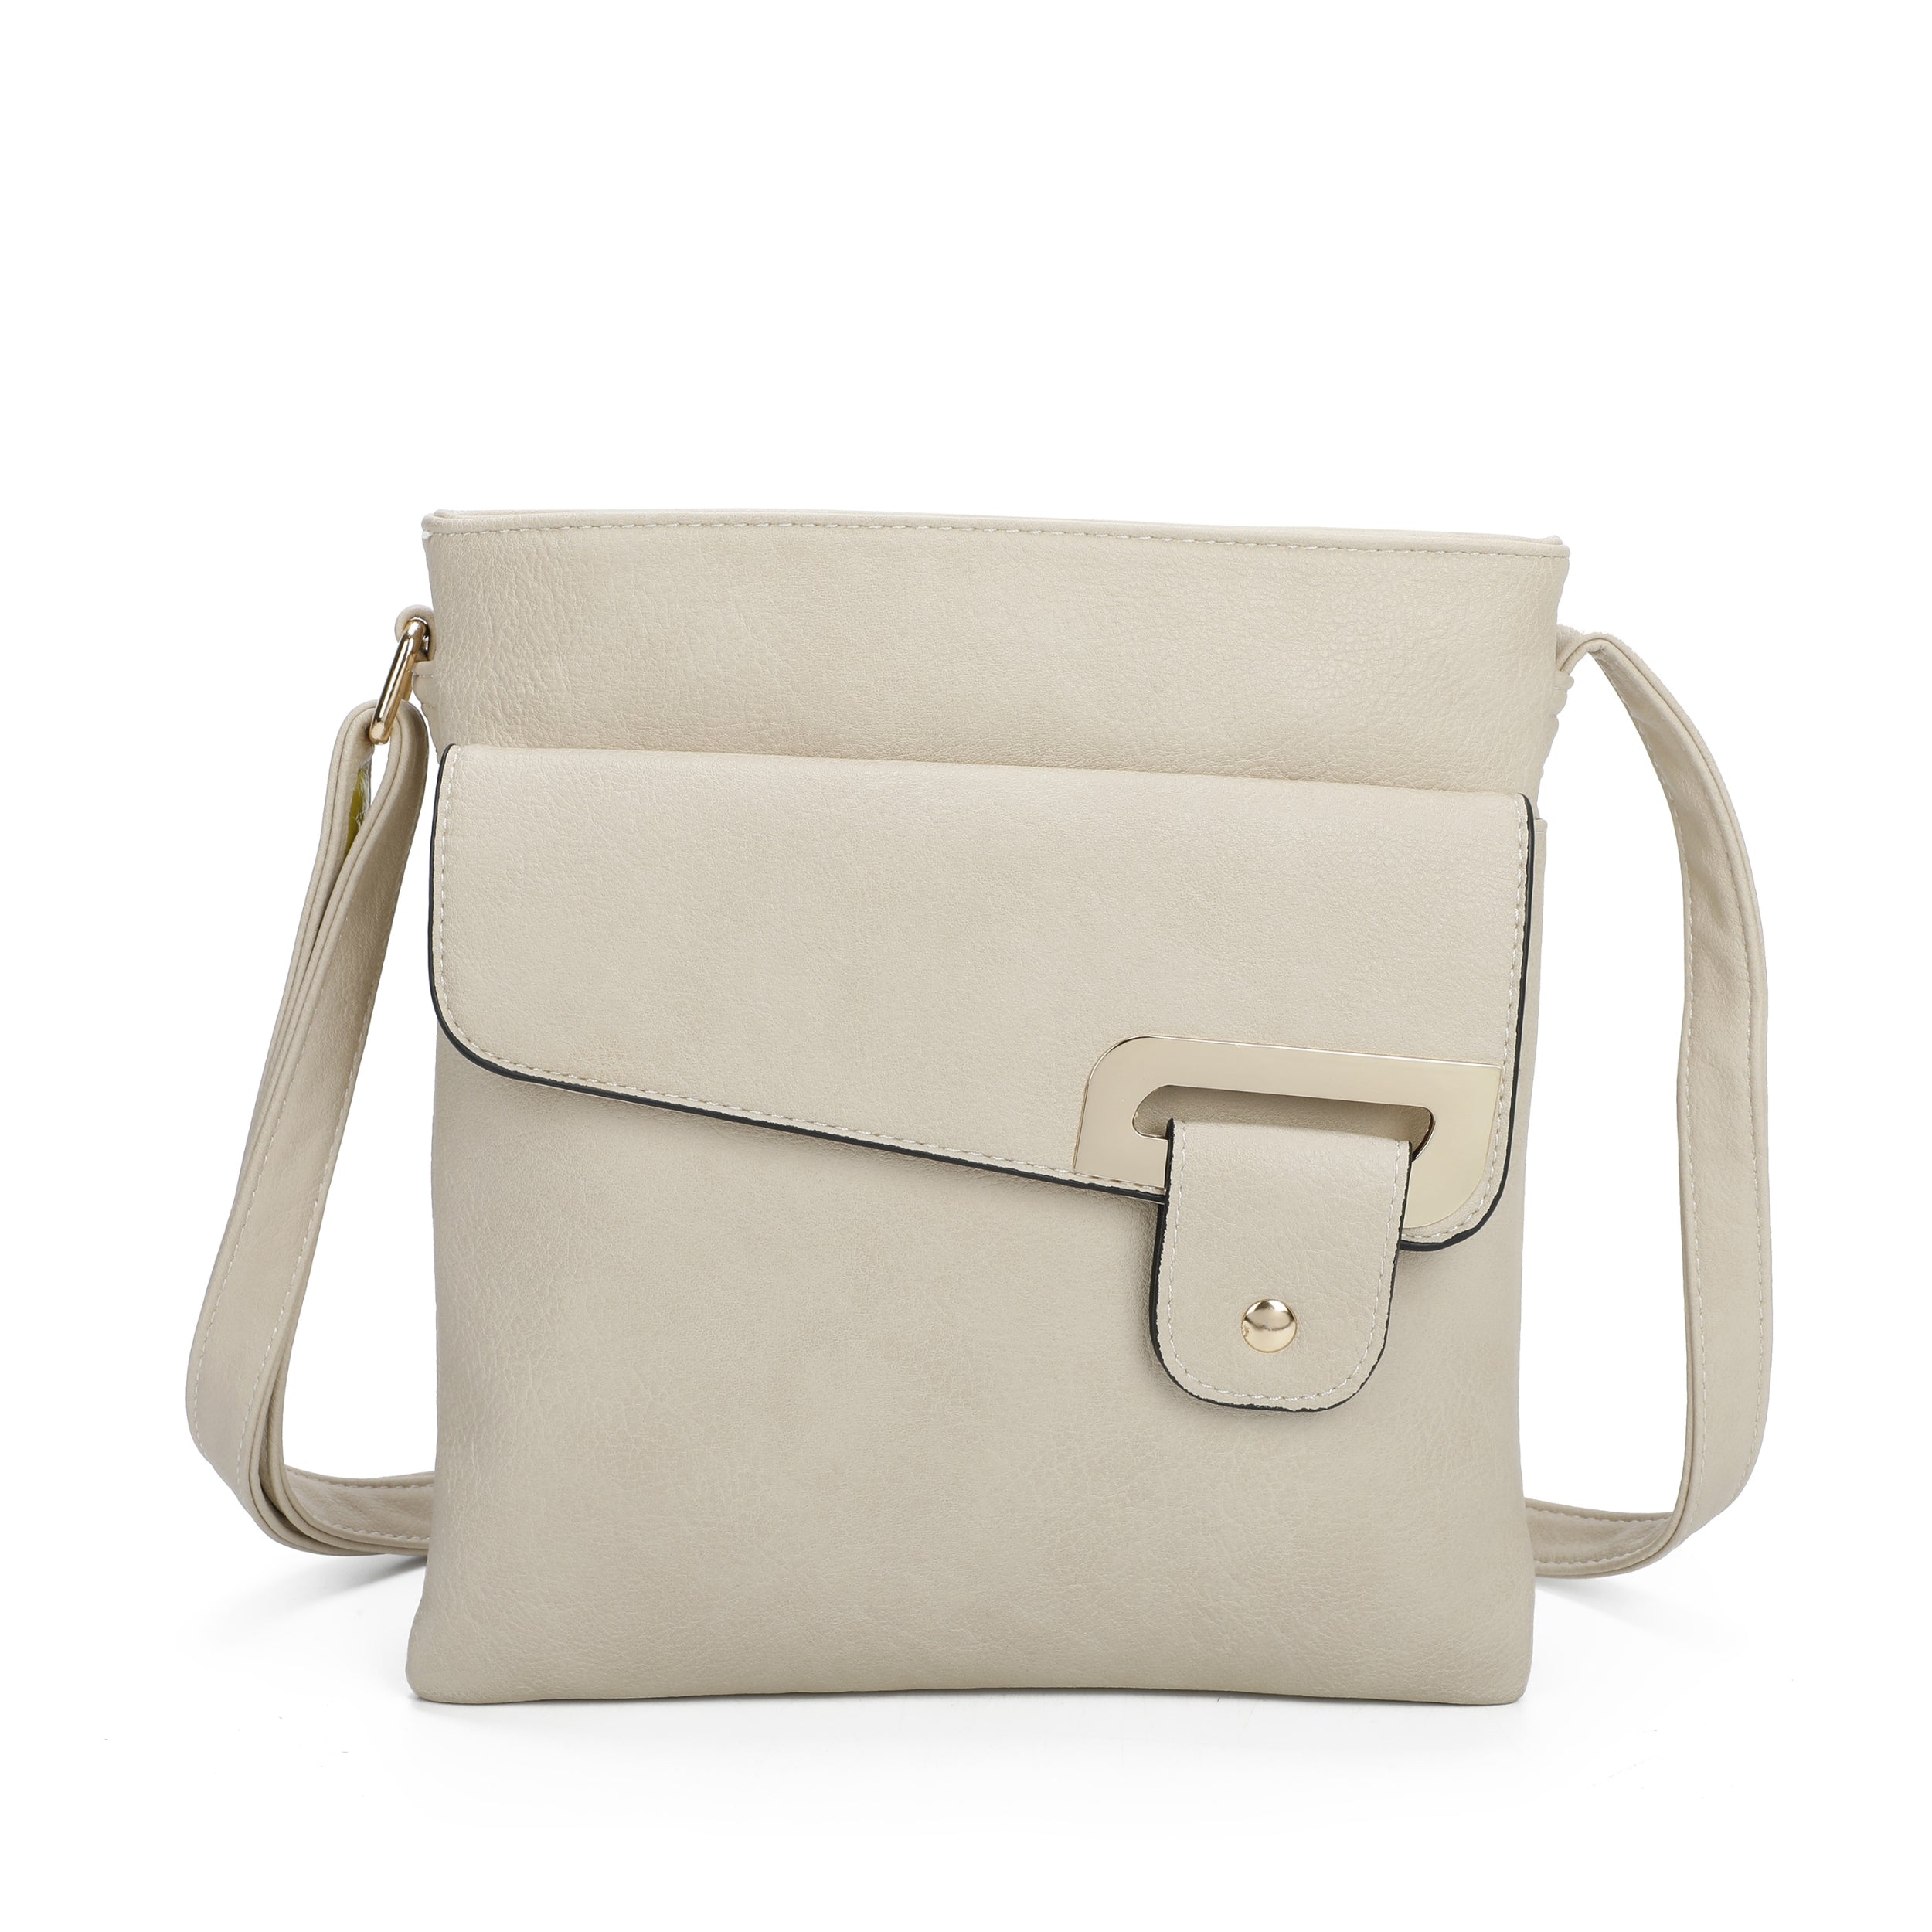 Craze London Crossbody bag with Double Compartments